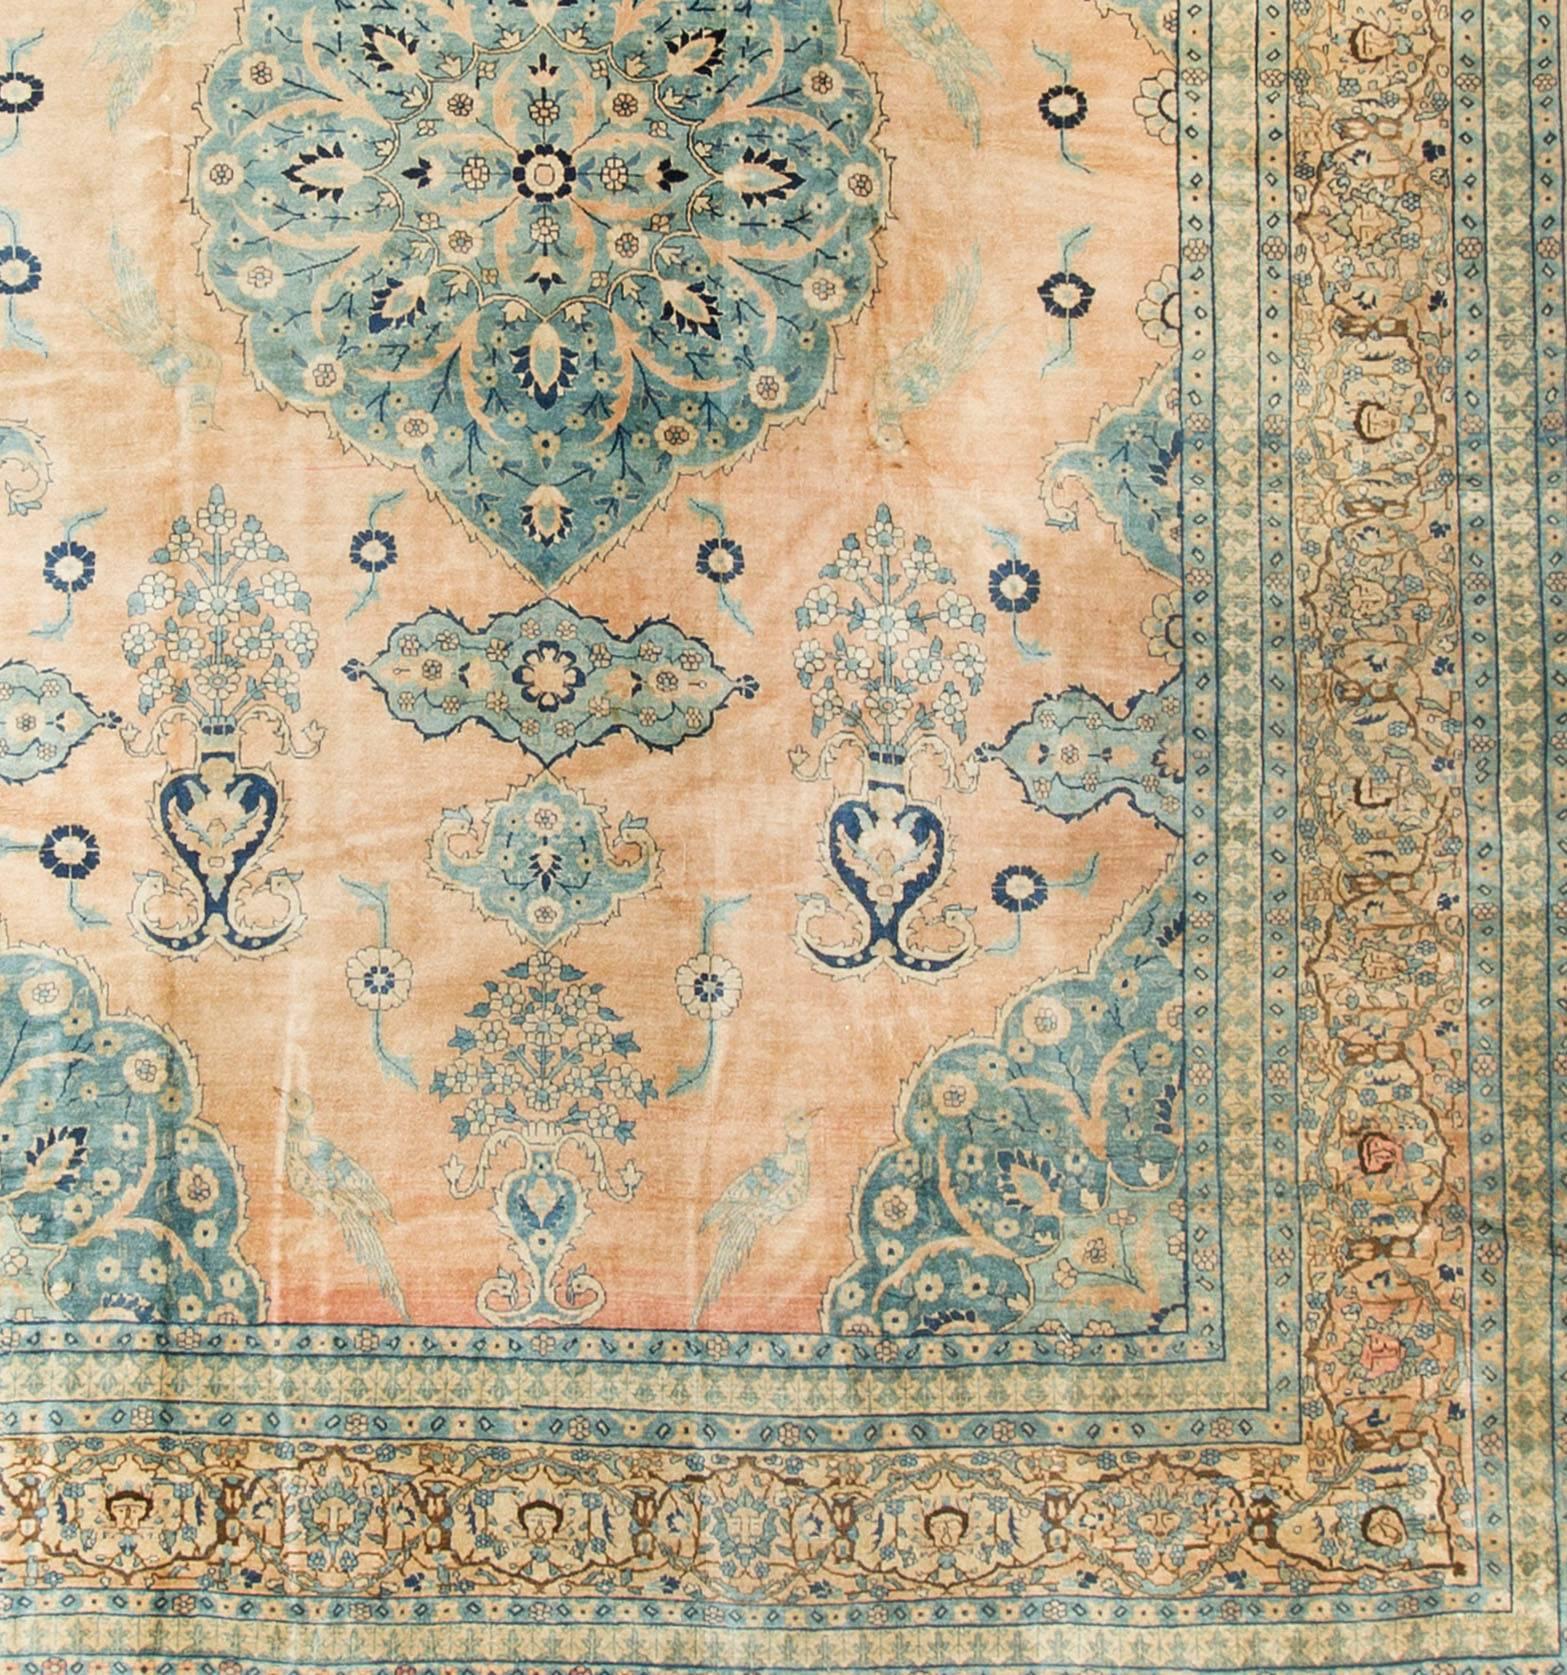 A vintage circa 1940s Persian handwoven Tabriz rug. The soft pastel peach-rose colored field adds a lightness to the rug that the darker central medallion enhances. All enclosed within a main border repeating the soft colors and multiple guard